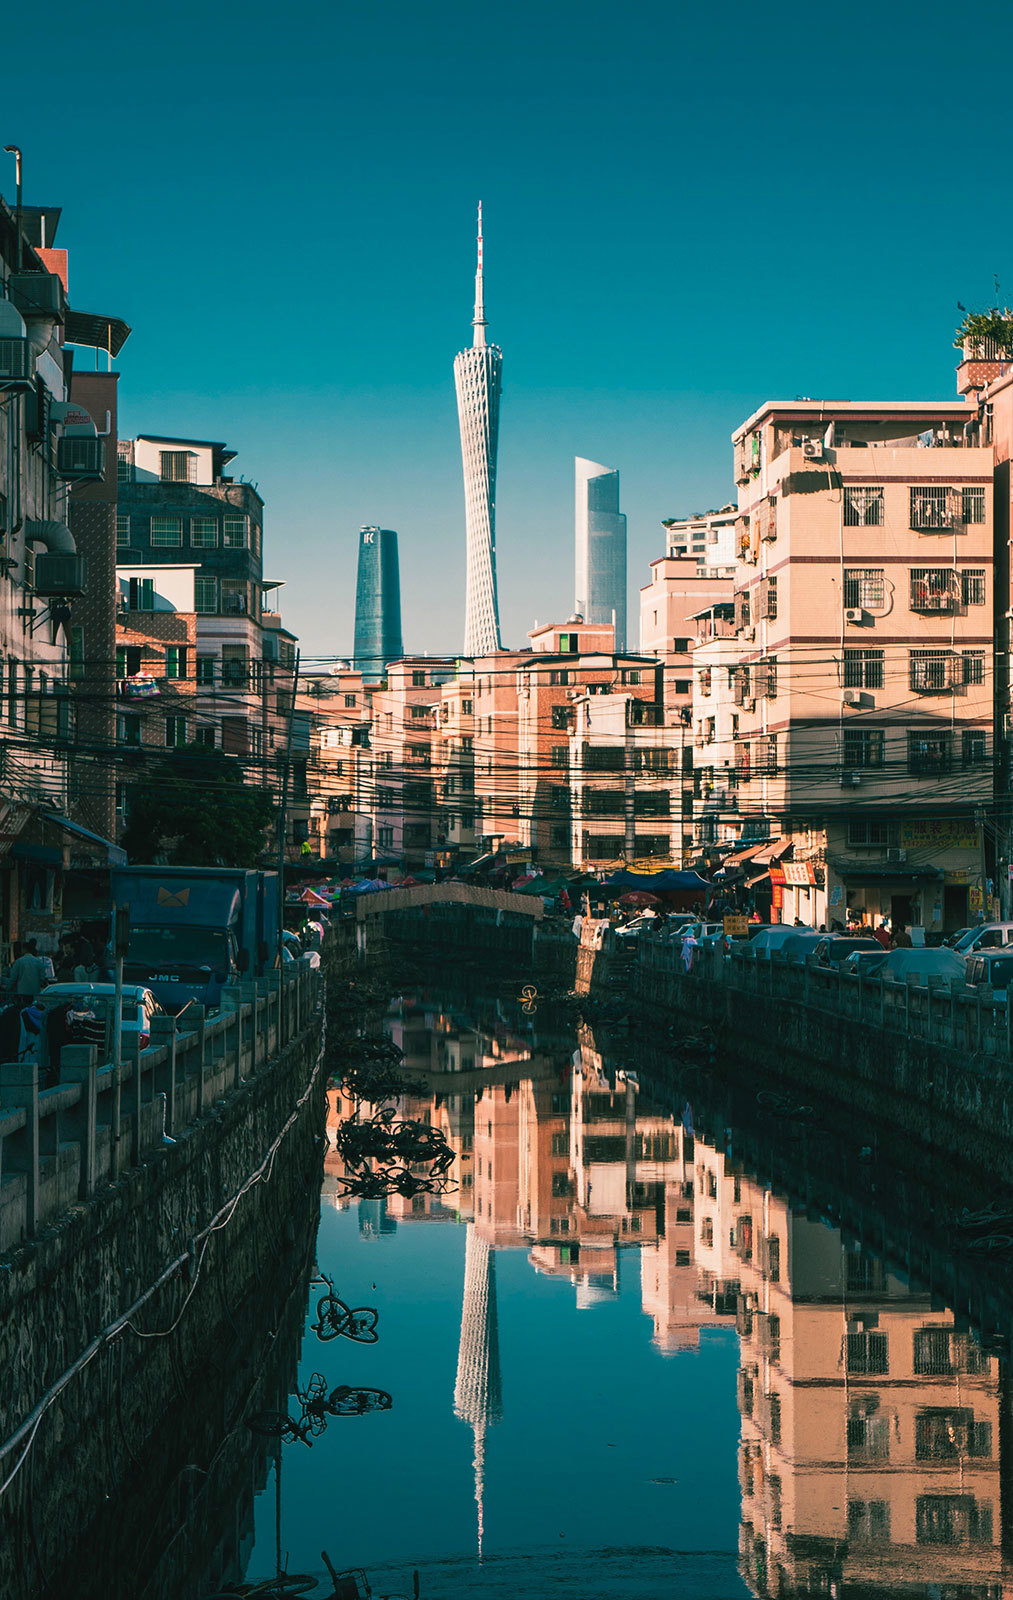 A street view of Haizhu District and the Canton Tower in Guangzhou